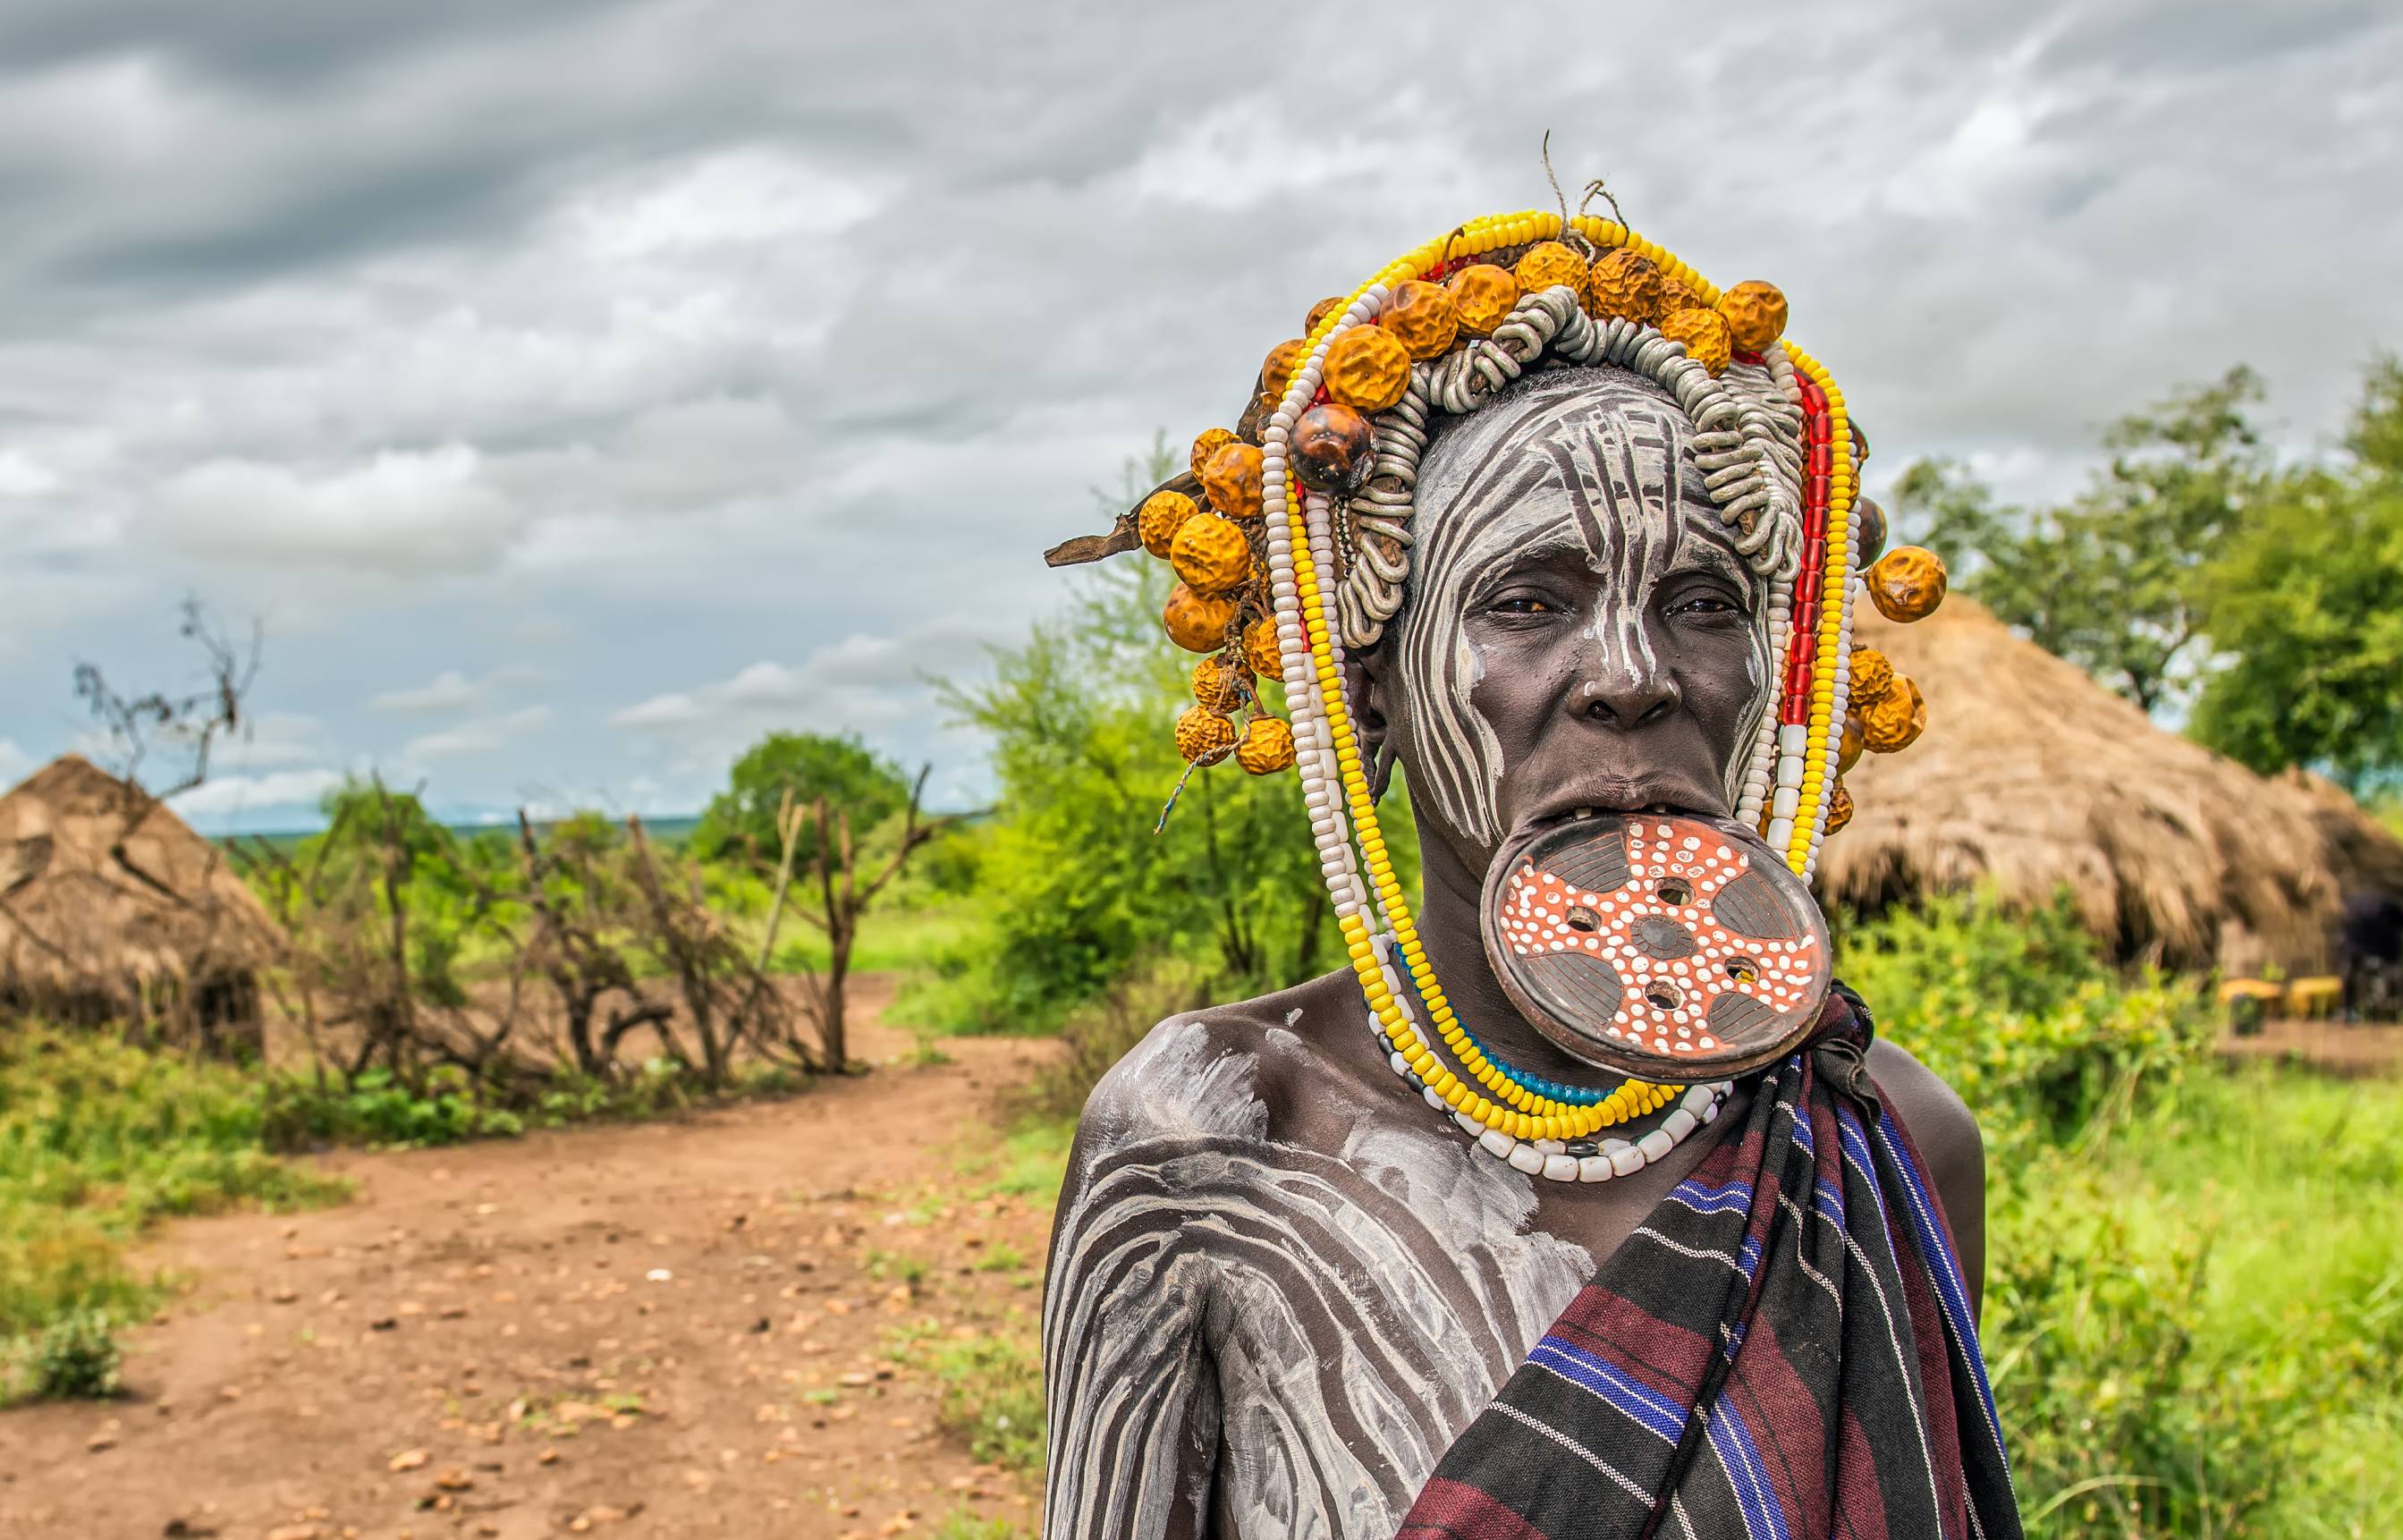 Omo Valley, Ethiopia - May 7, 2015 : Woman from the african tribe Mursi with a big lip plate in her village.